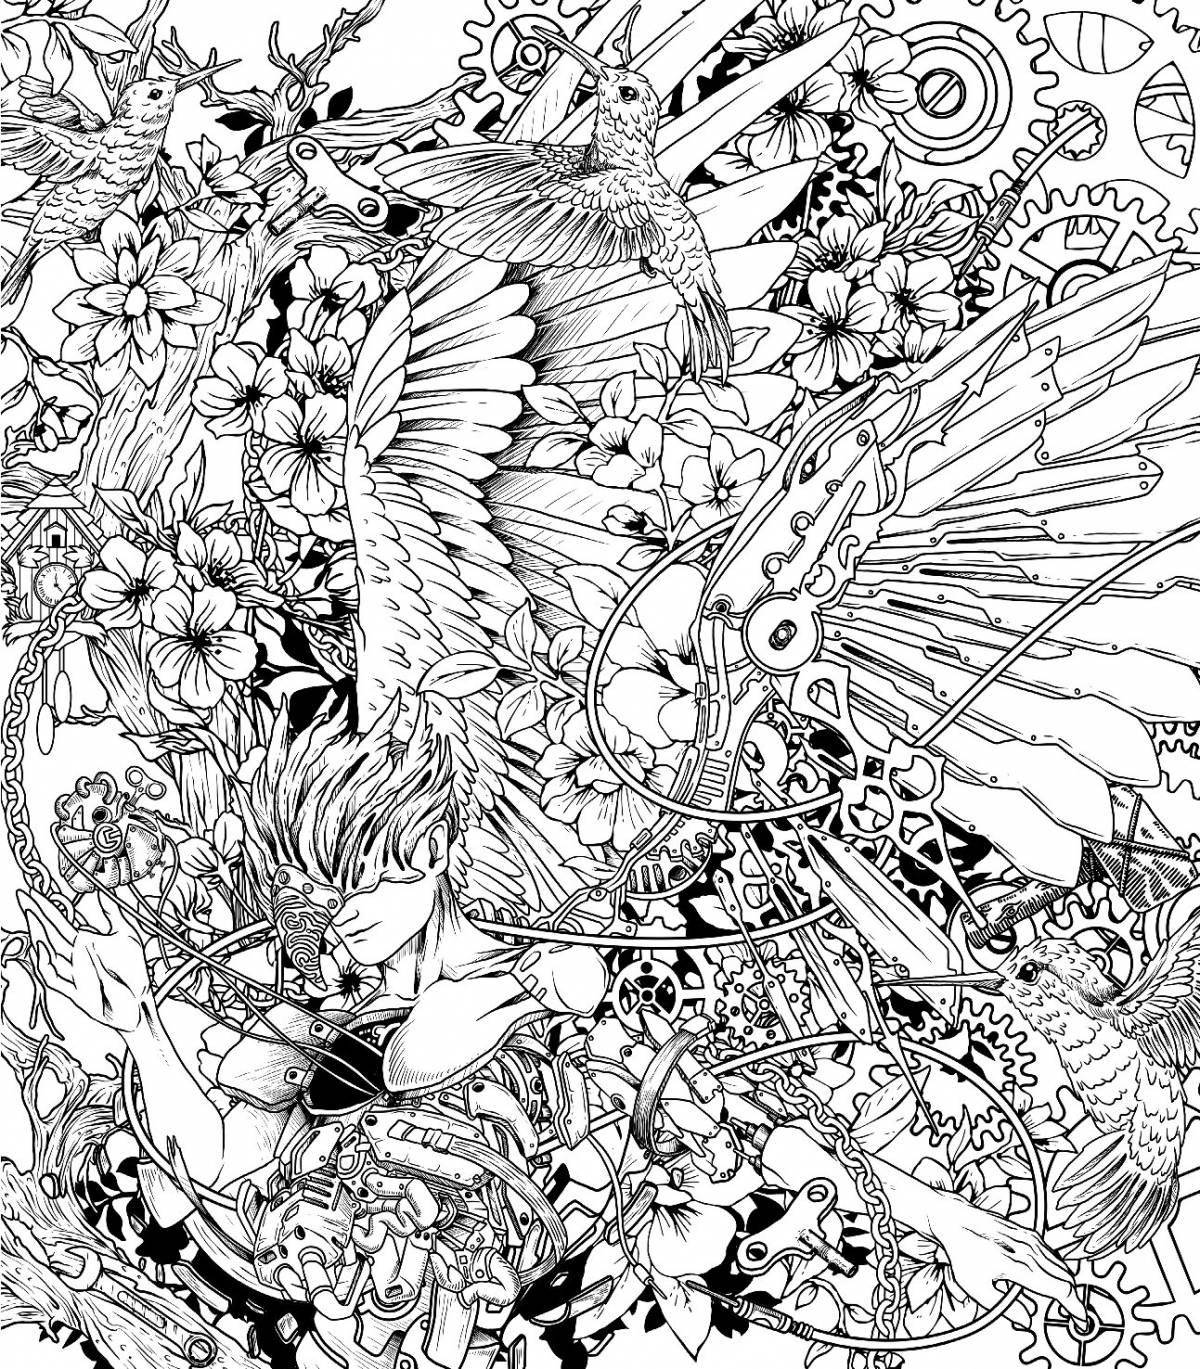 Perfect coloring page hidden worlds beyond imagination